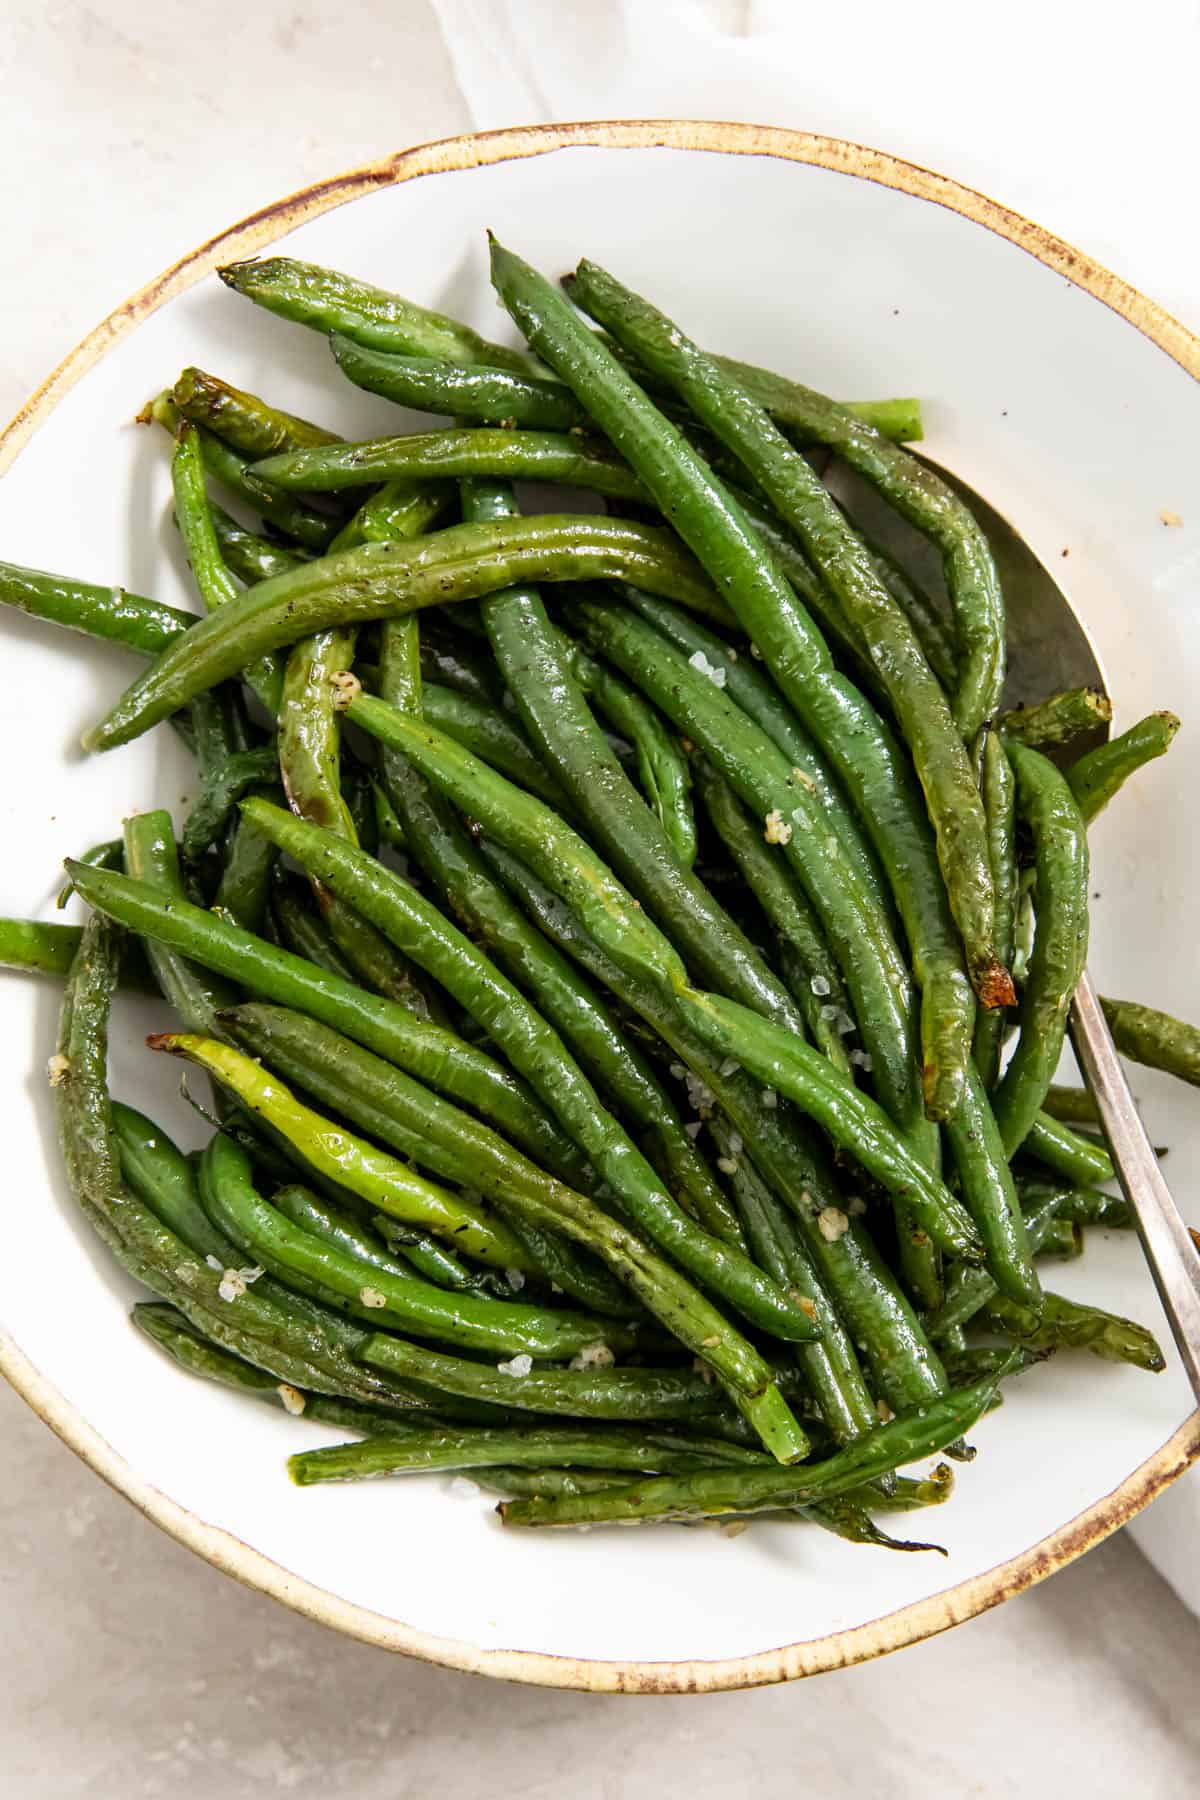 Cooked air fryer green beans sitting in a white bowl with a spoon for serving.